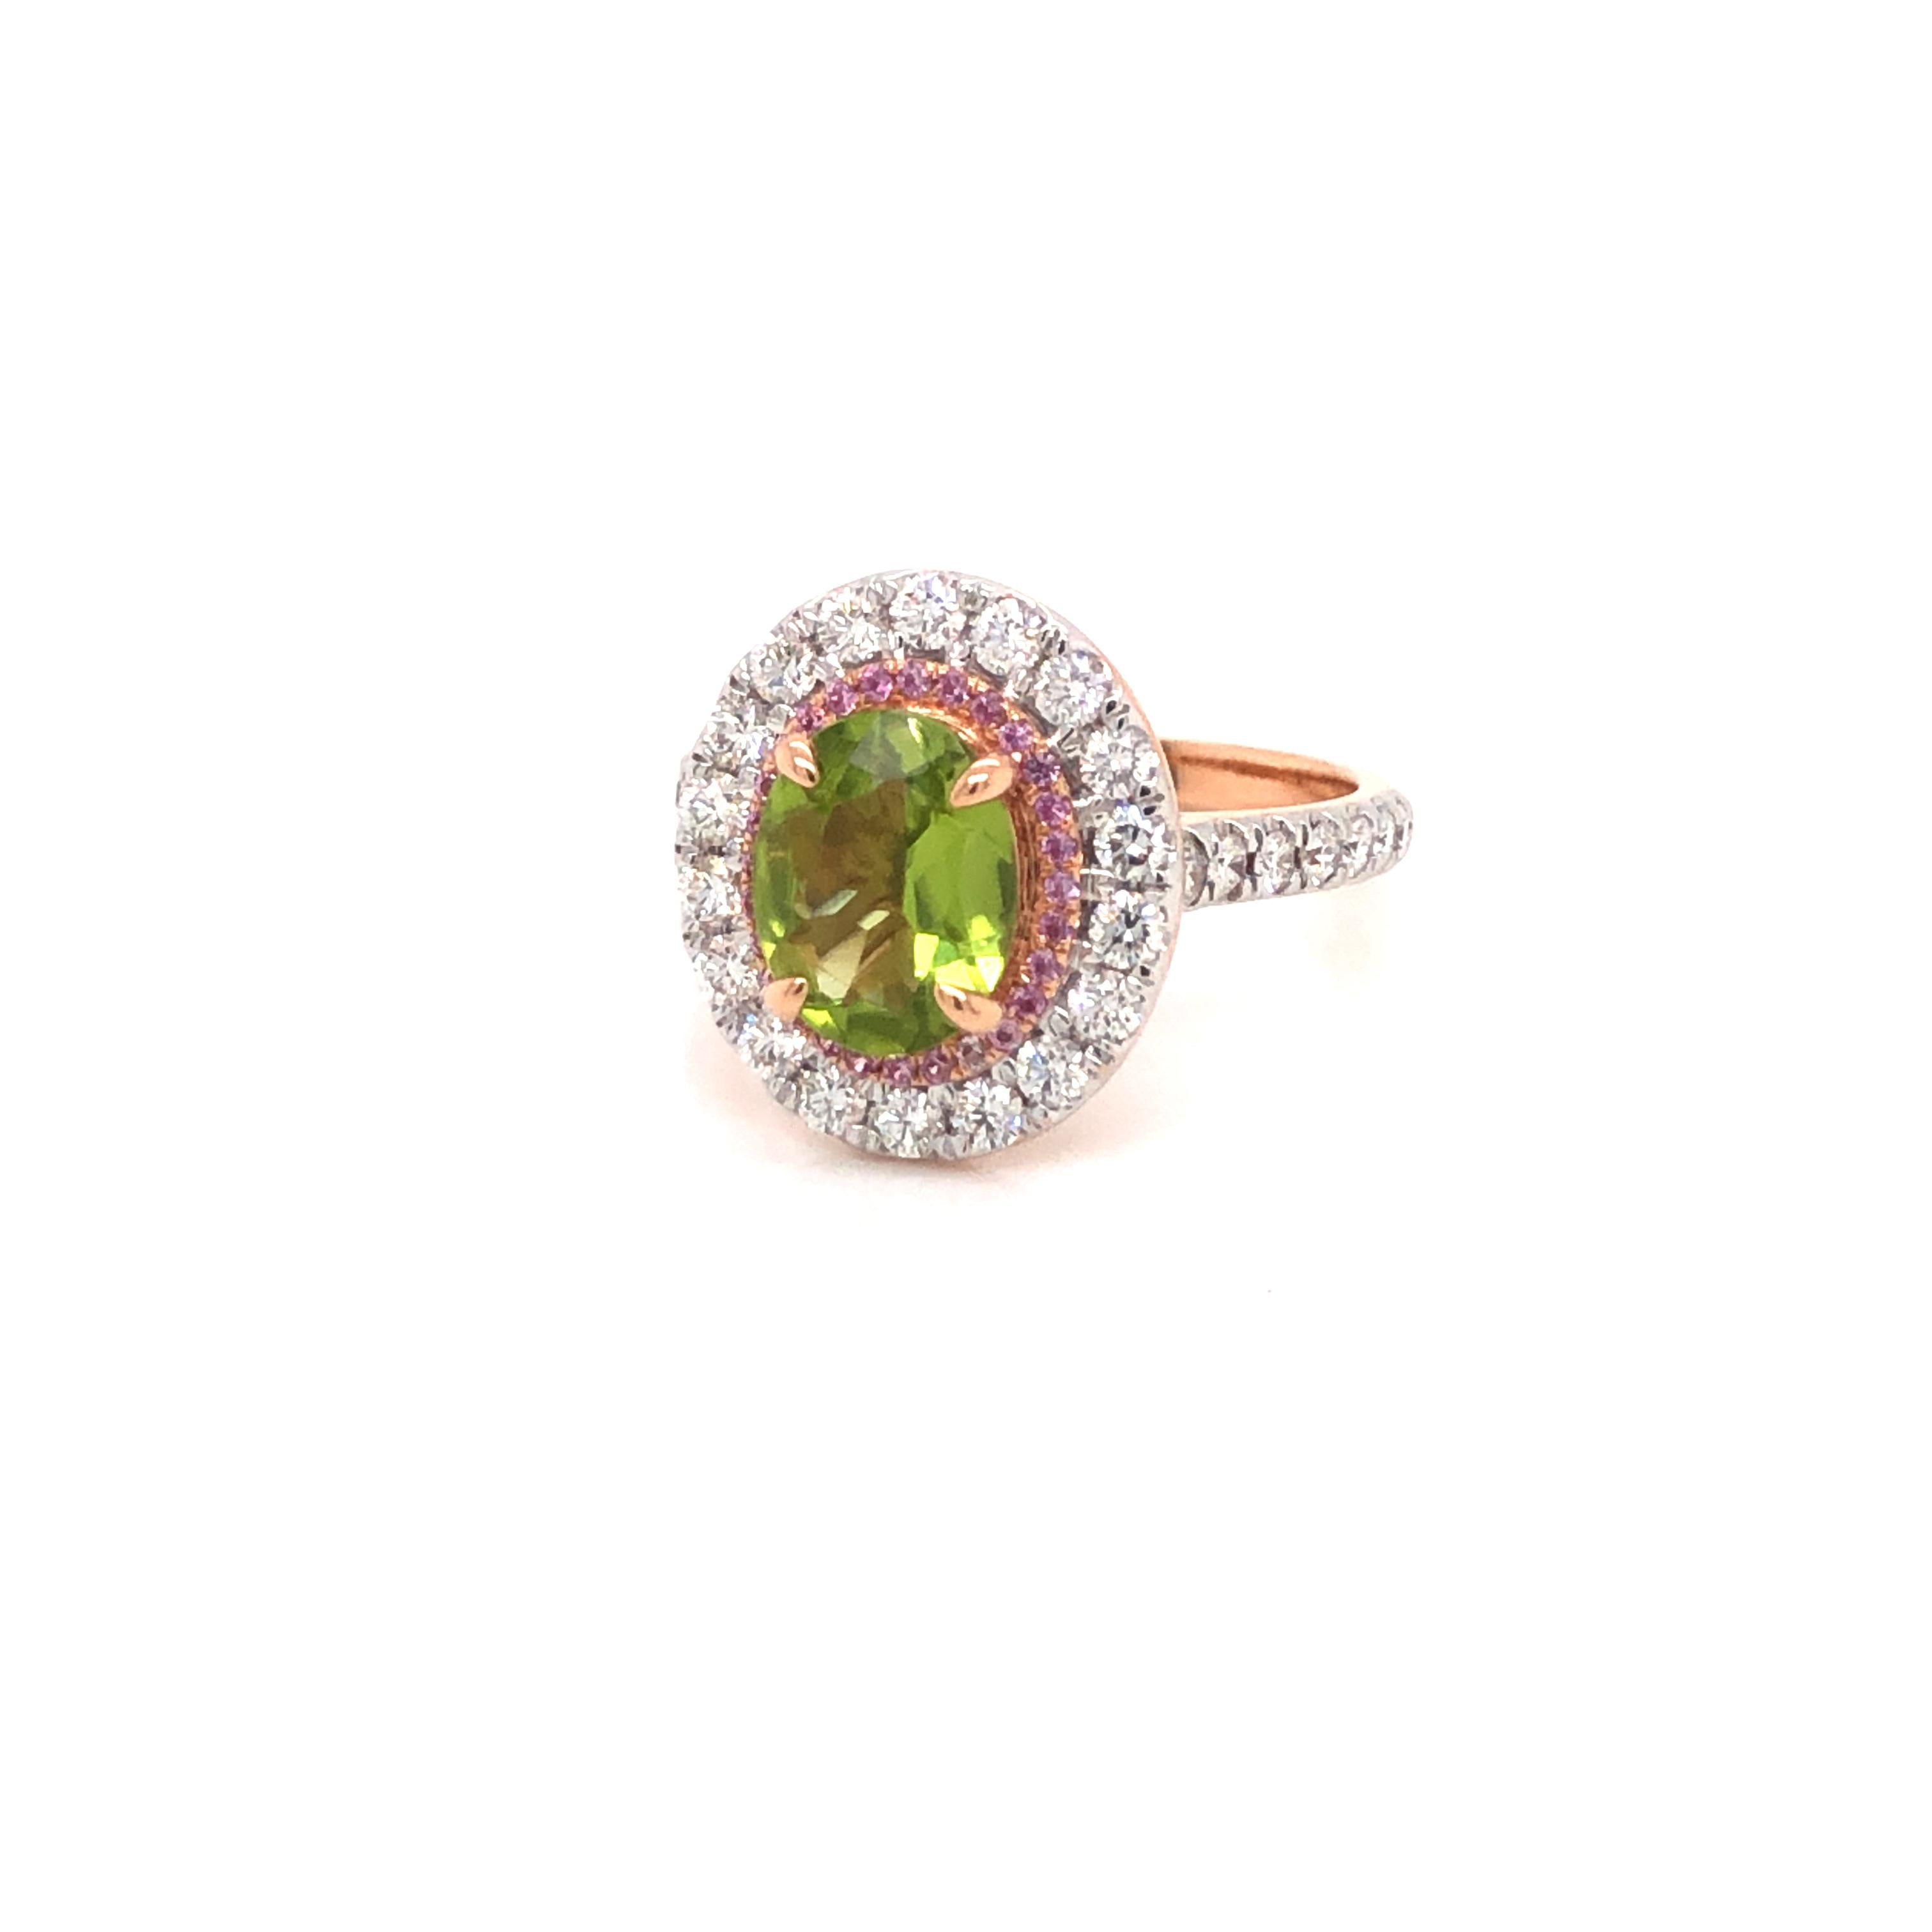 2.5 Carat Green Peridot Pink Sapphire Diamond Engagement Cocktail 18KT Ring For Sale 2